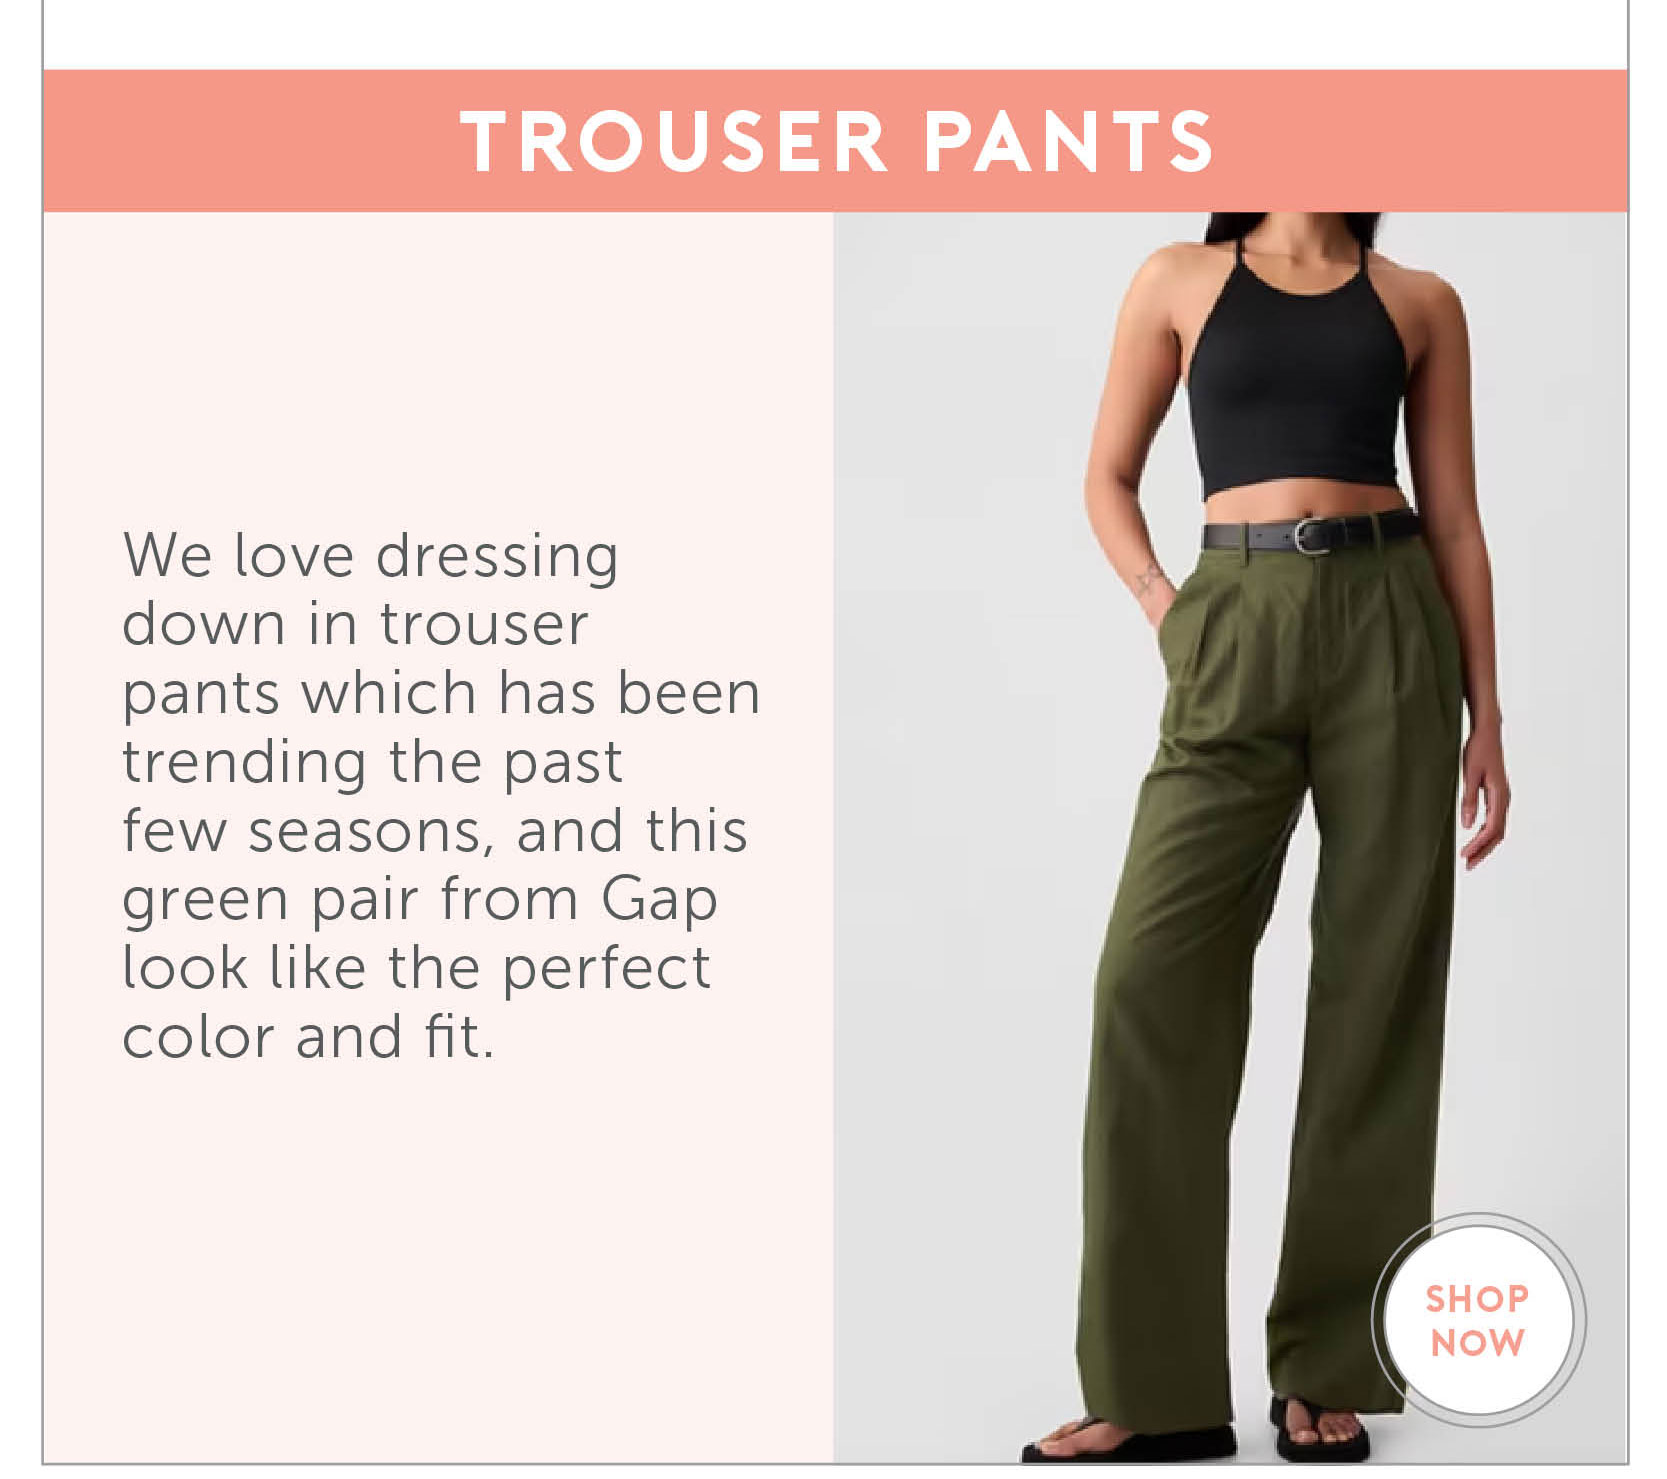 6. Trouser Pants We love dressing down in trouser pants which has been trending the past few seasons, and this green pair from Gap look like the perfect color and fit.